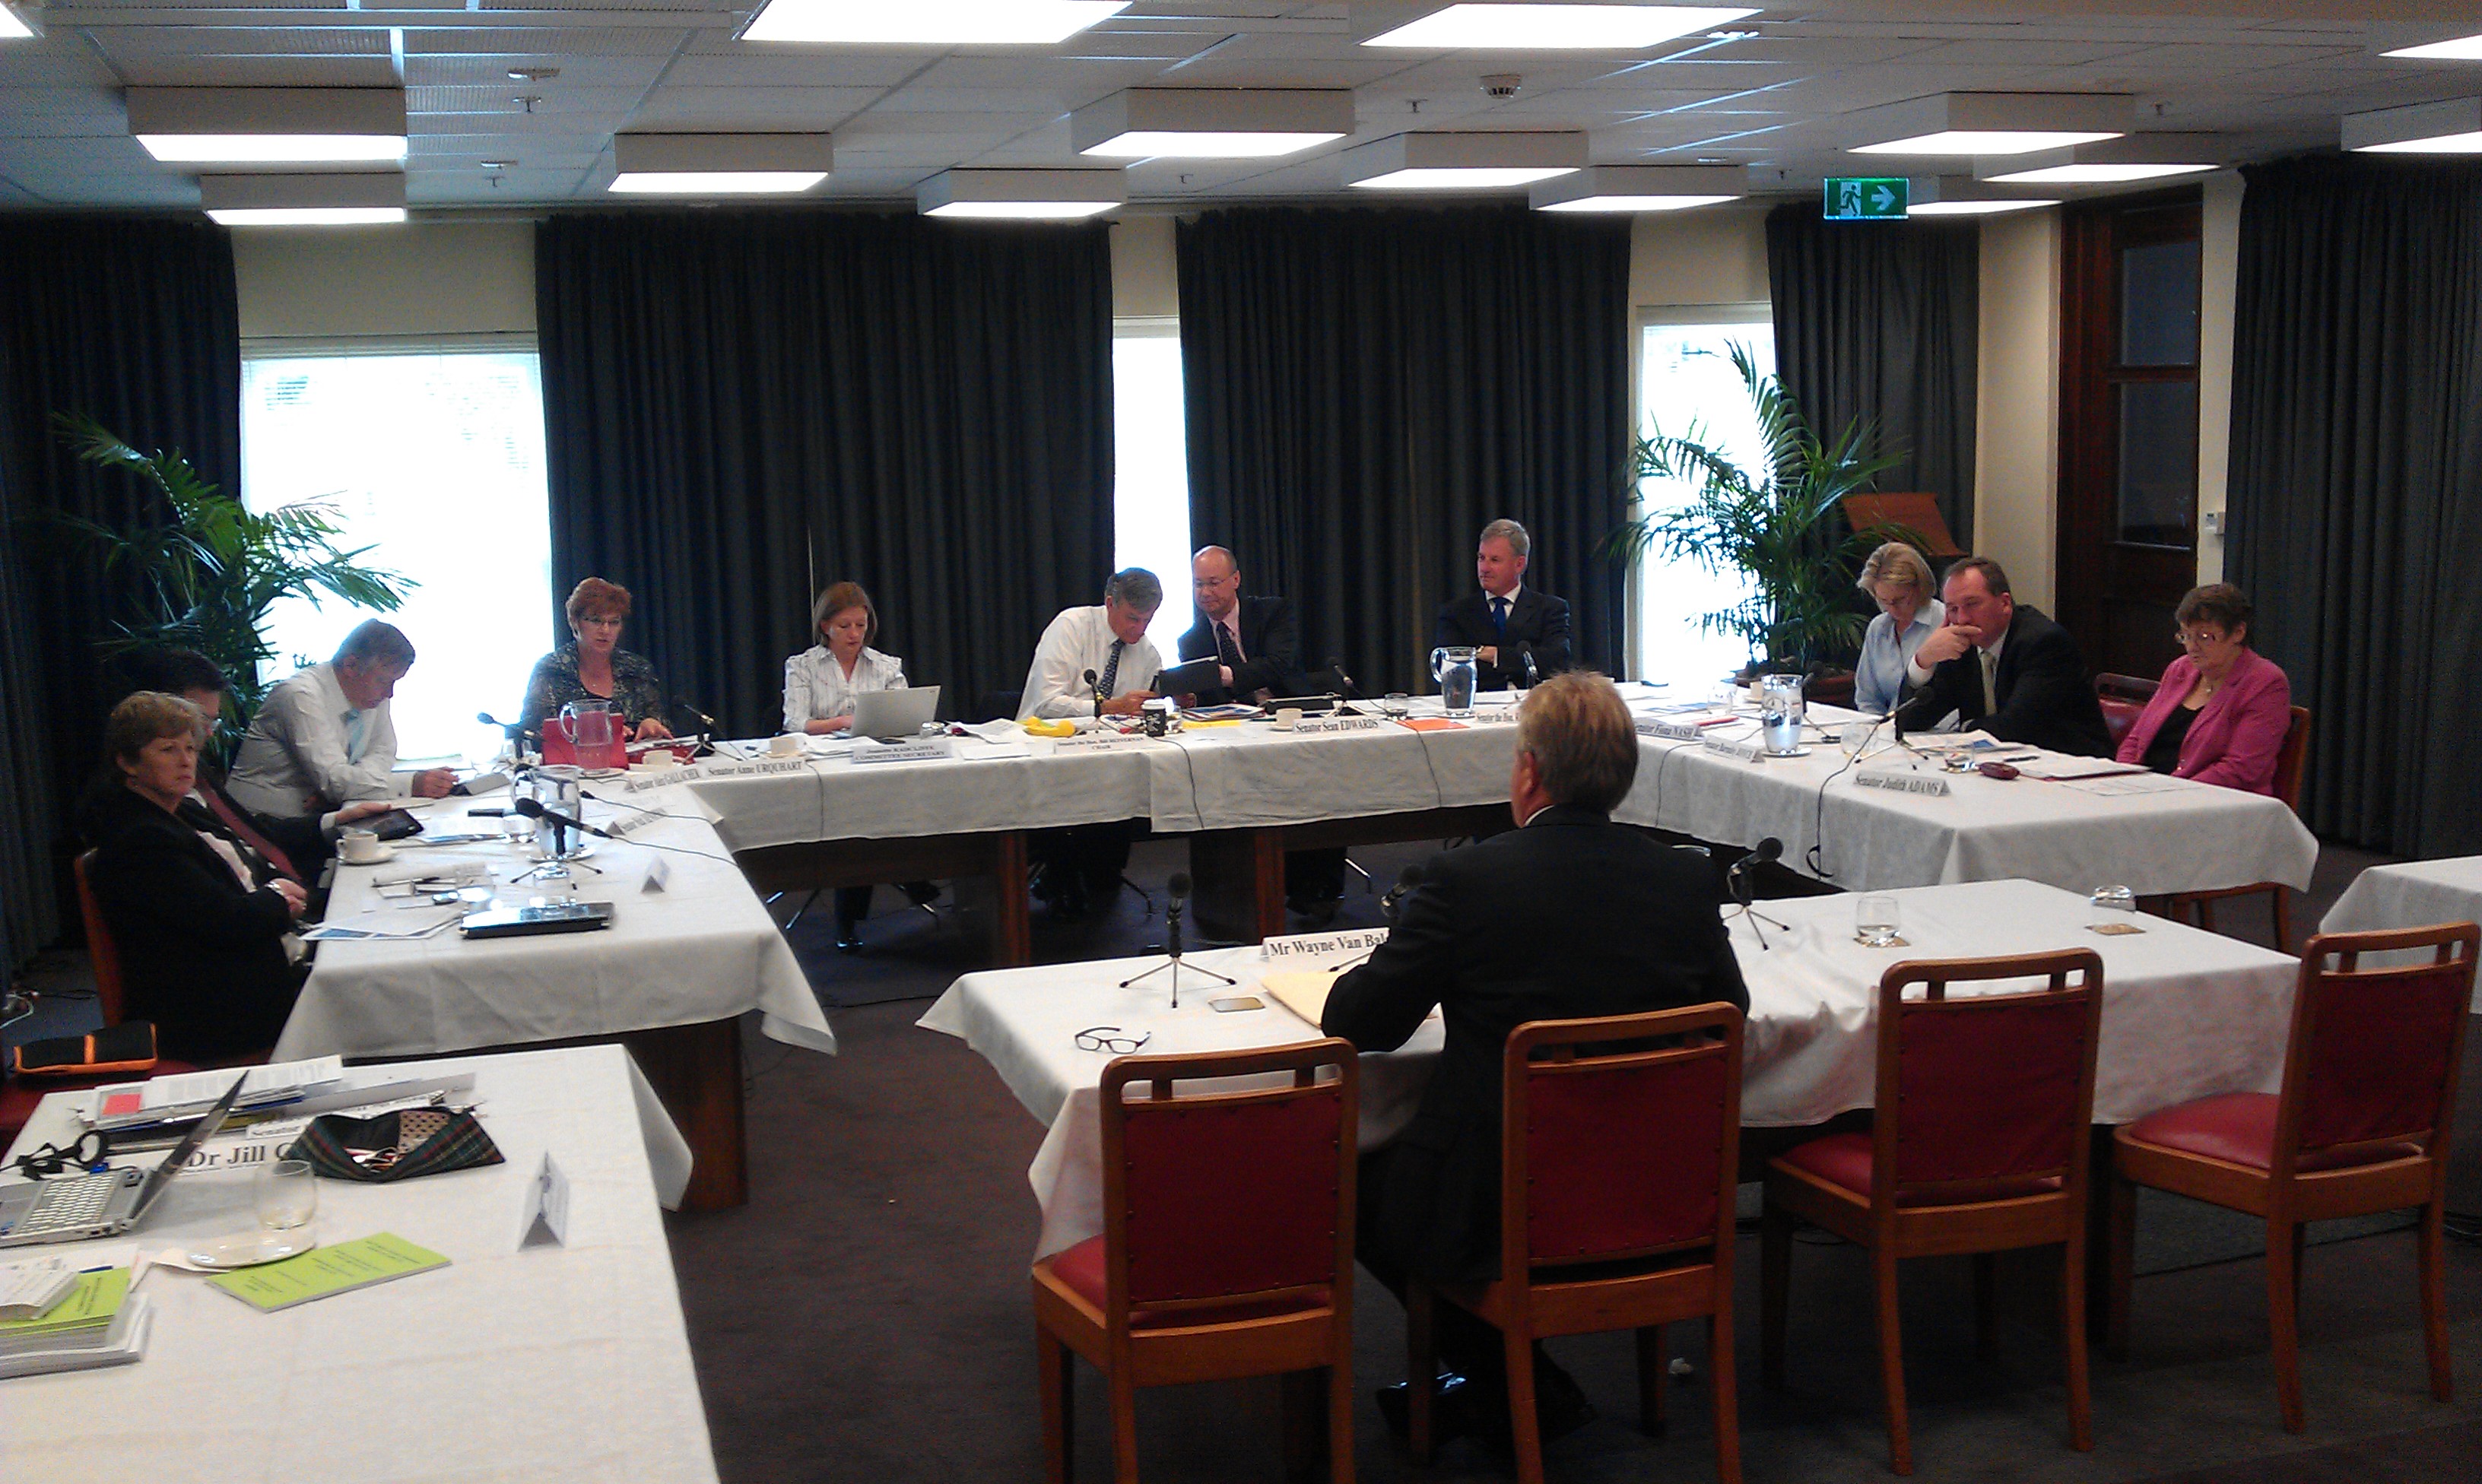 Committee hearing, Private Members Dining Room, Old Parliament House, Canberra, 16 November 2011. L-R: Senators Christine Milne, Nick Xenophon (obscured), Alex Gallacher and Anne Urquhart, Jeanette Radcliffe [Committee Secretary], Senators Bill Heffernan [Chair], Sean Edwards, Richard Colbeck, Fiona Nash, Barbaby Joyce and Judith Adams. Foreground: Wayne Van Balen [witness].